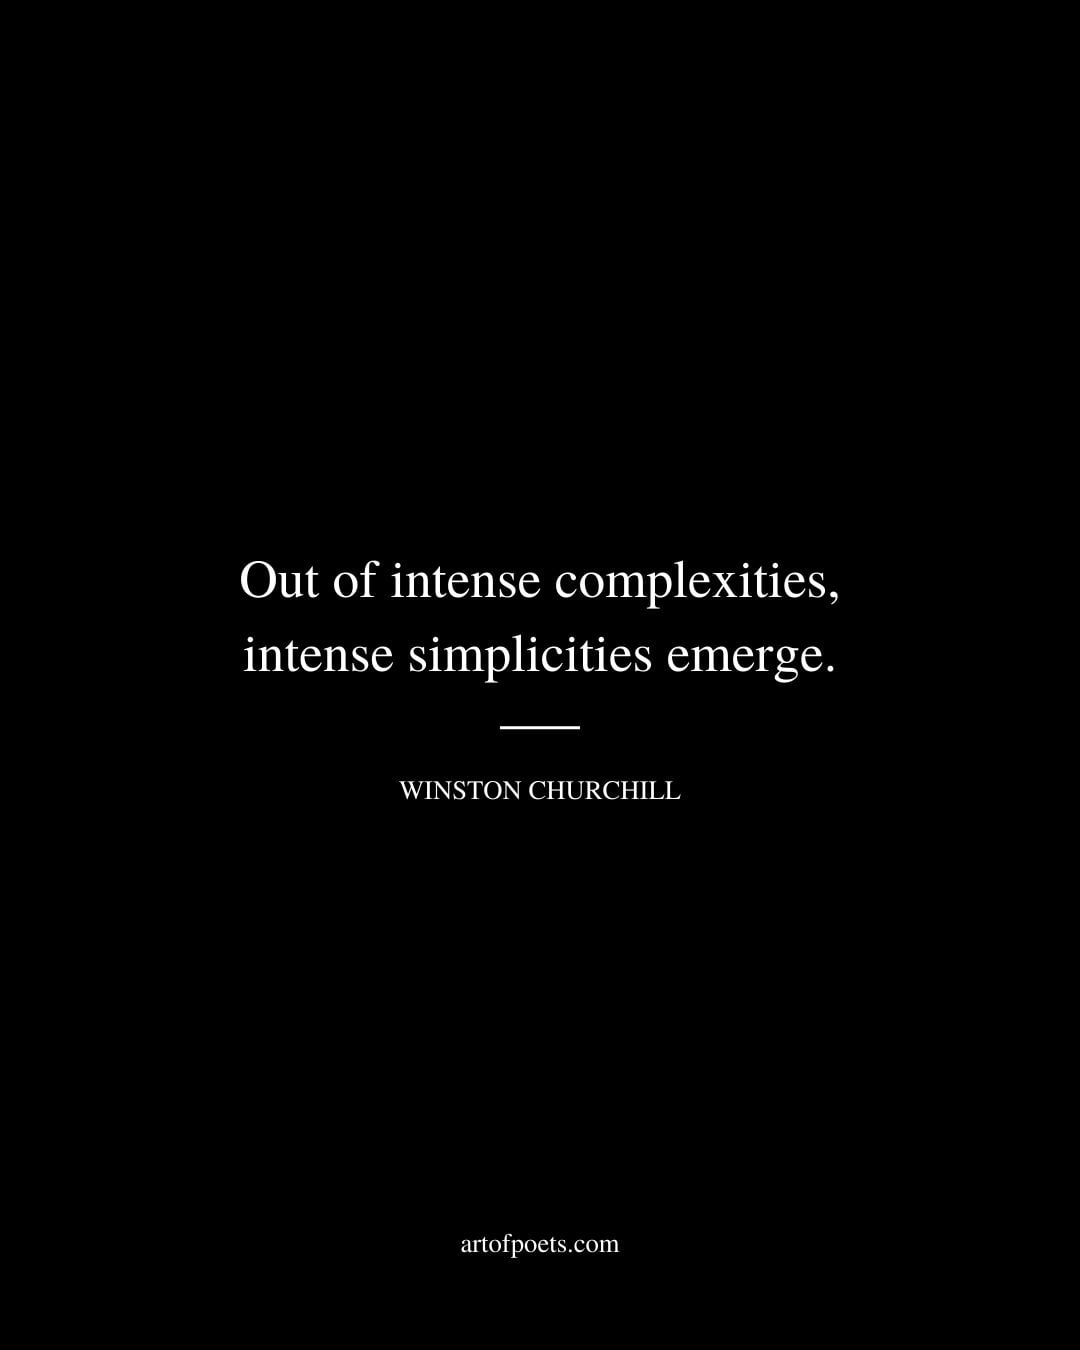 Out of intense complexities intense simplicities emerge